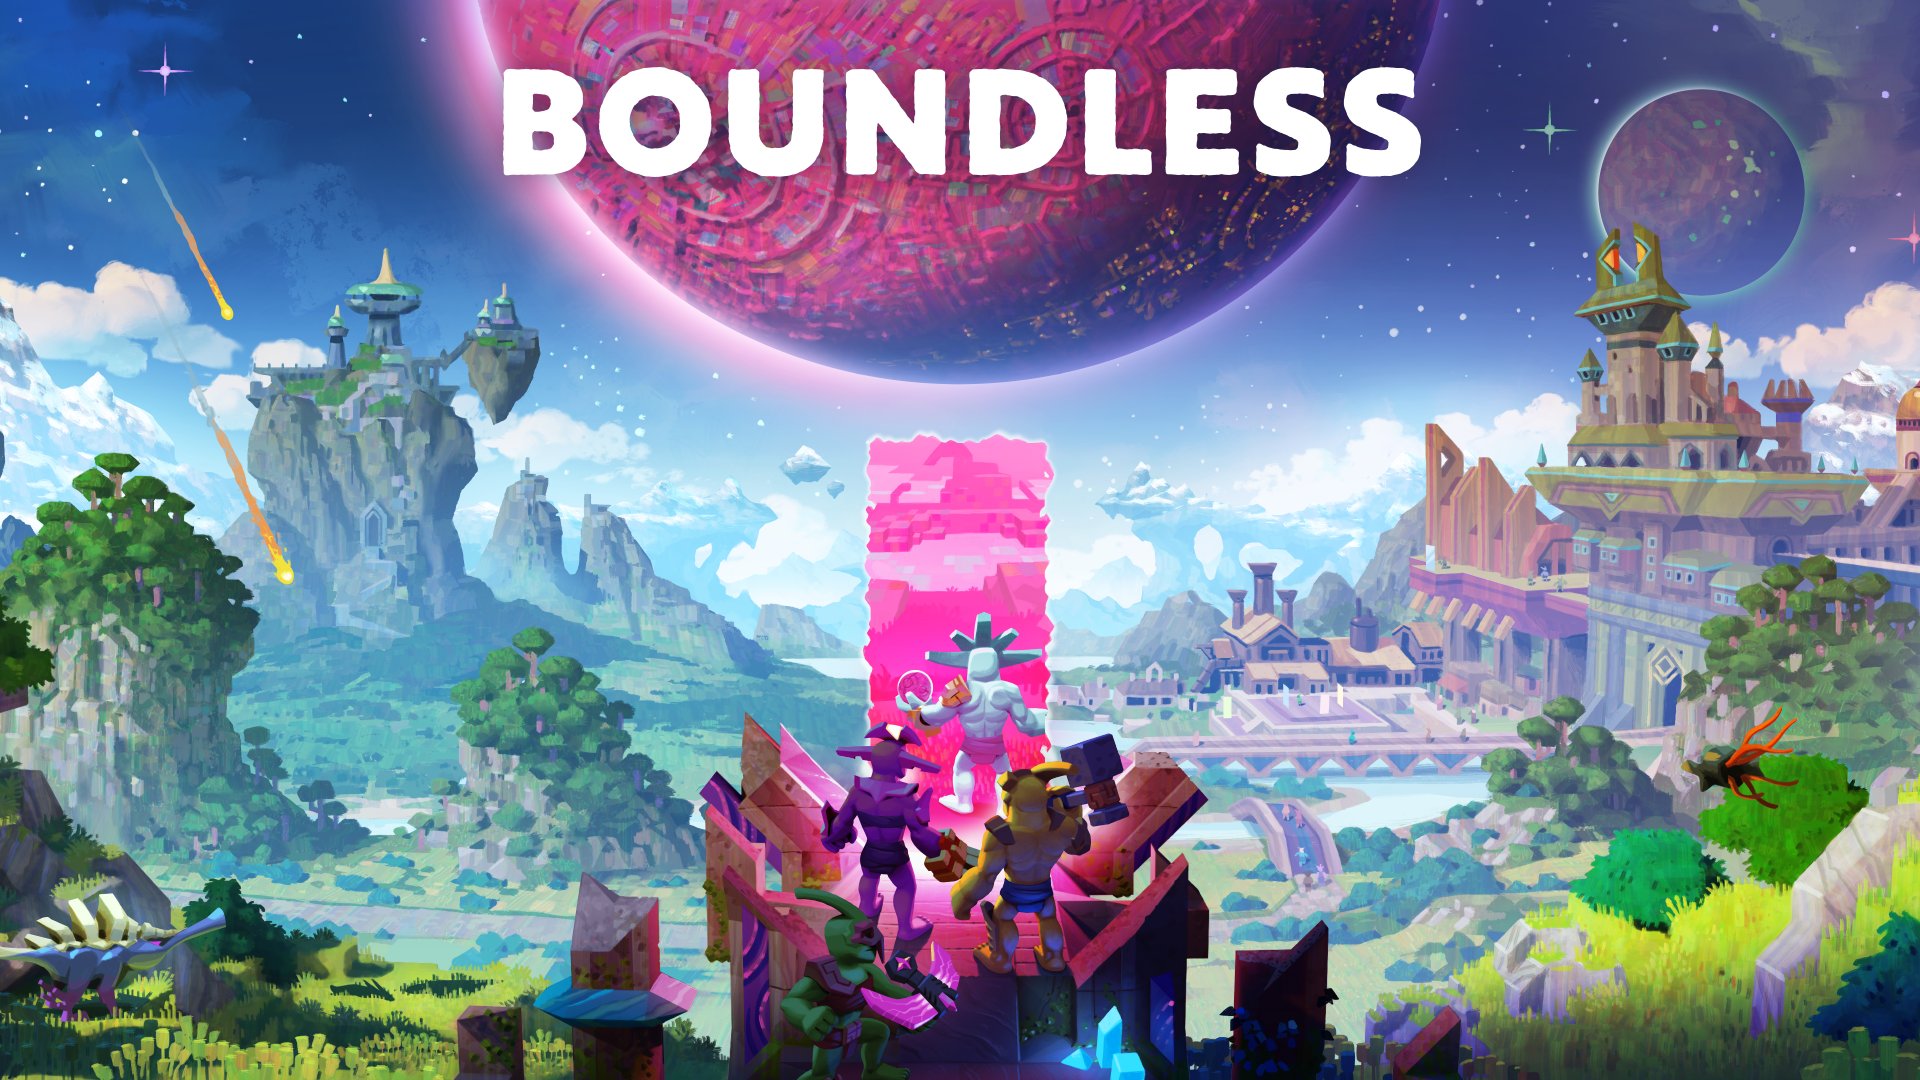 Boundless launch date revealed!